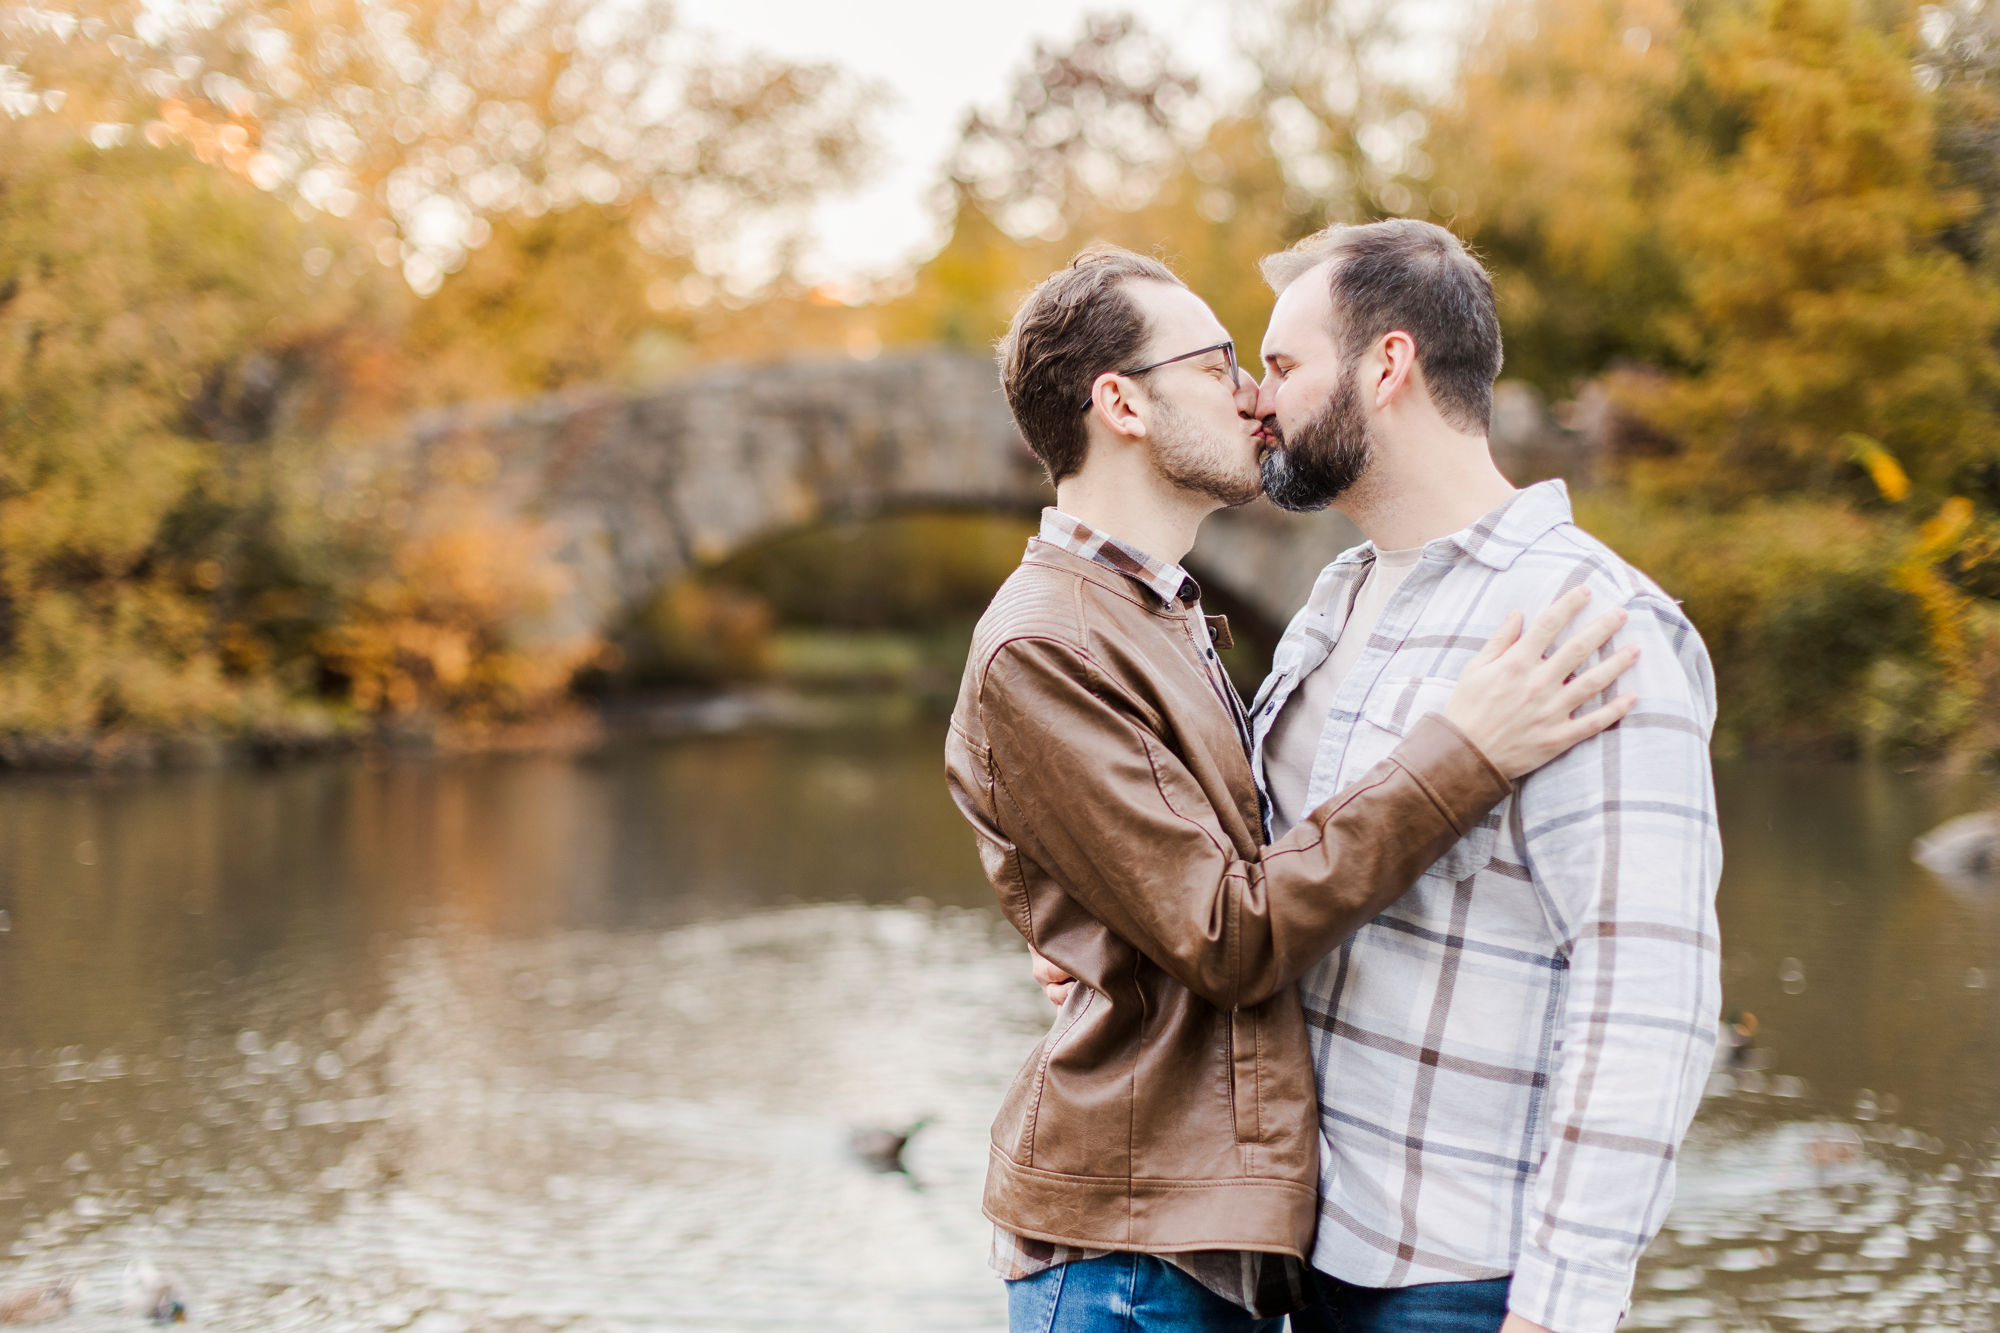 Sweet Central Park Engagement Photo Shoot in Fall